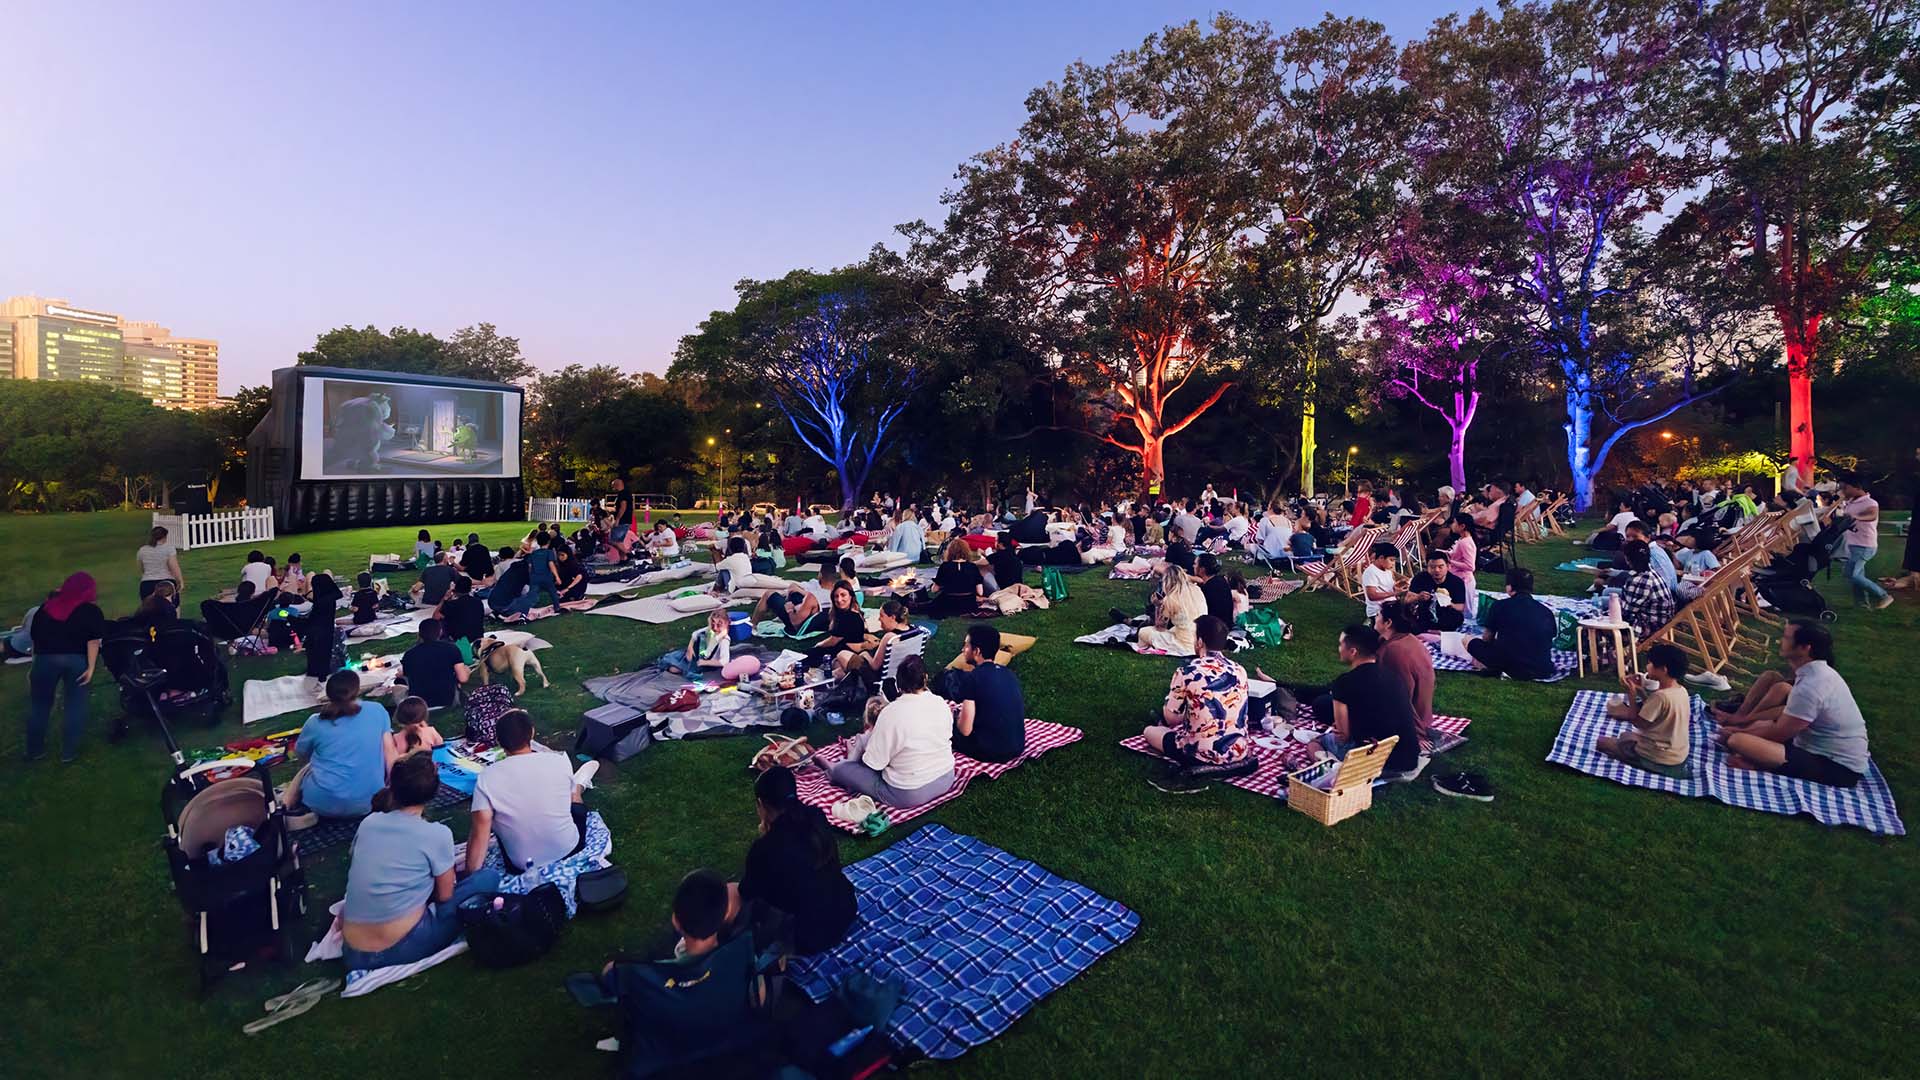 Outdoor Cinema in the Suburbs: Movie Date Night